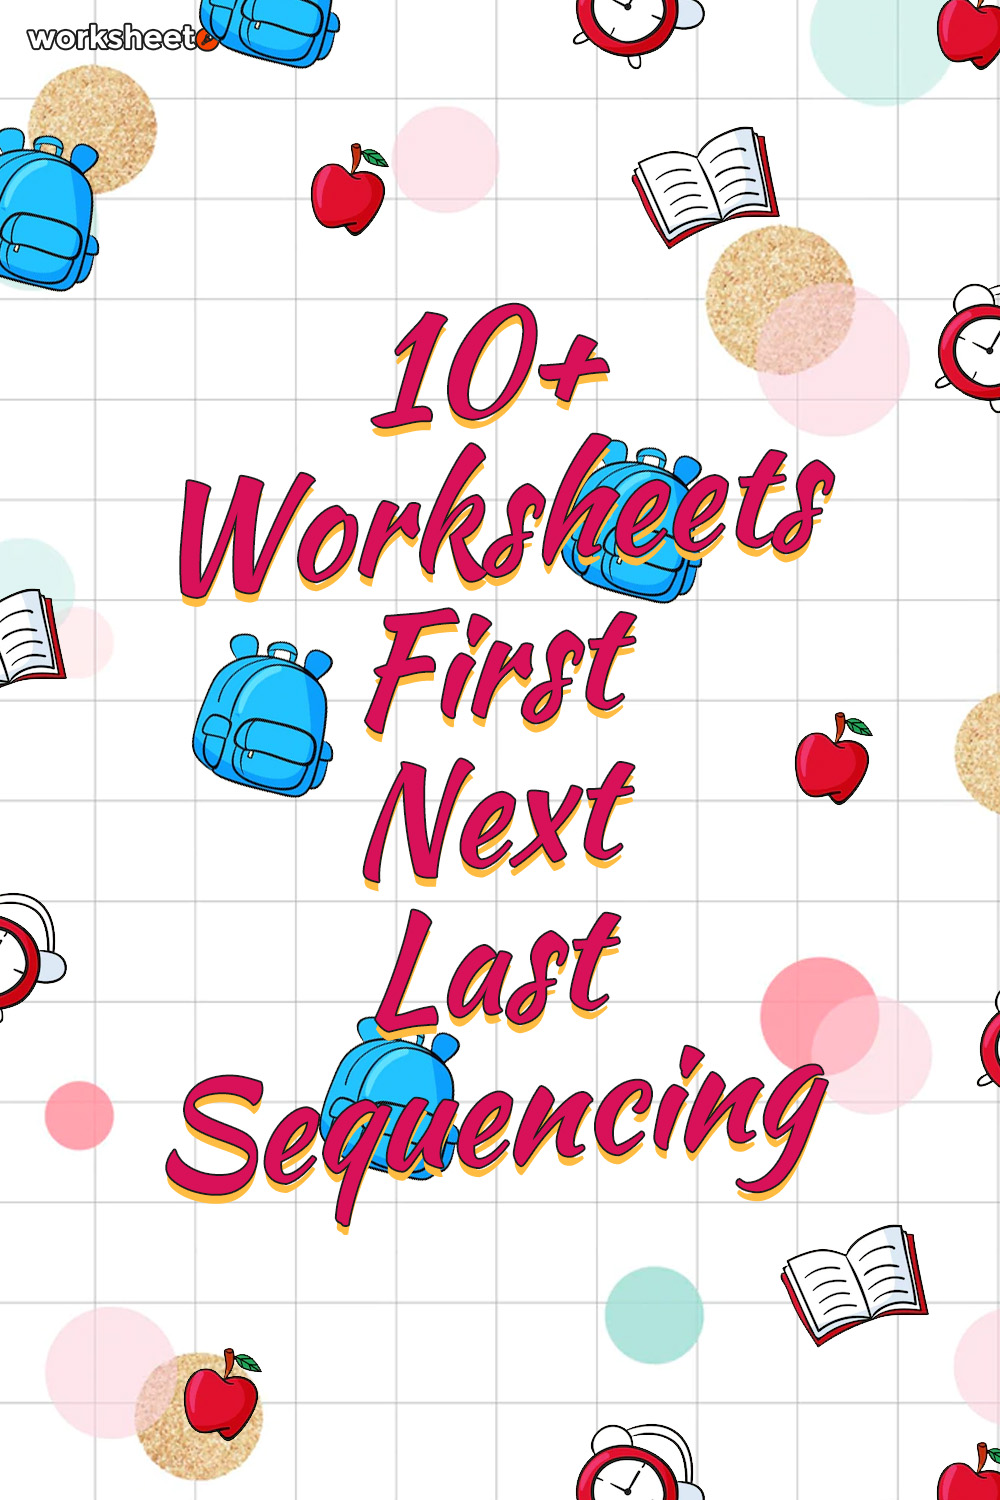 Worksheets First Next Last Sequencing